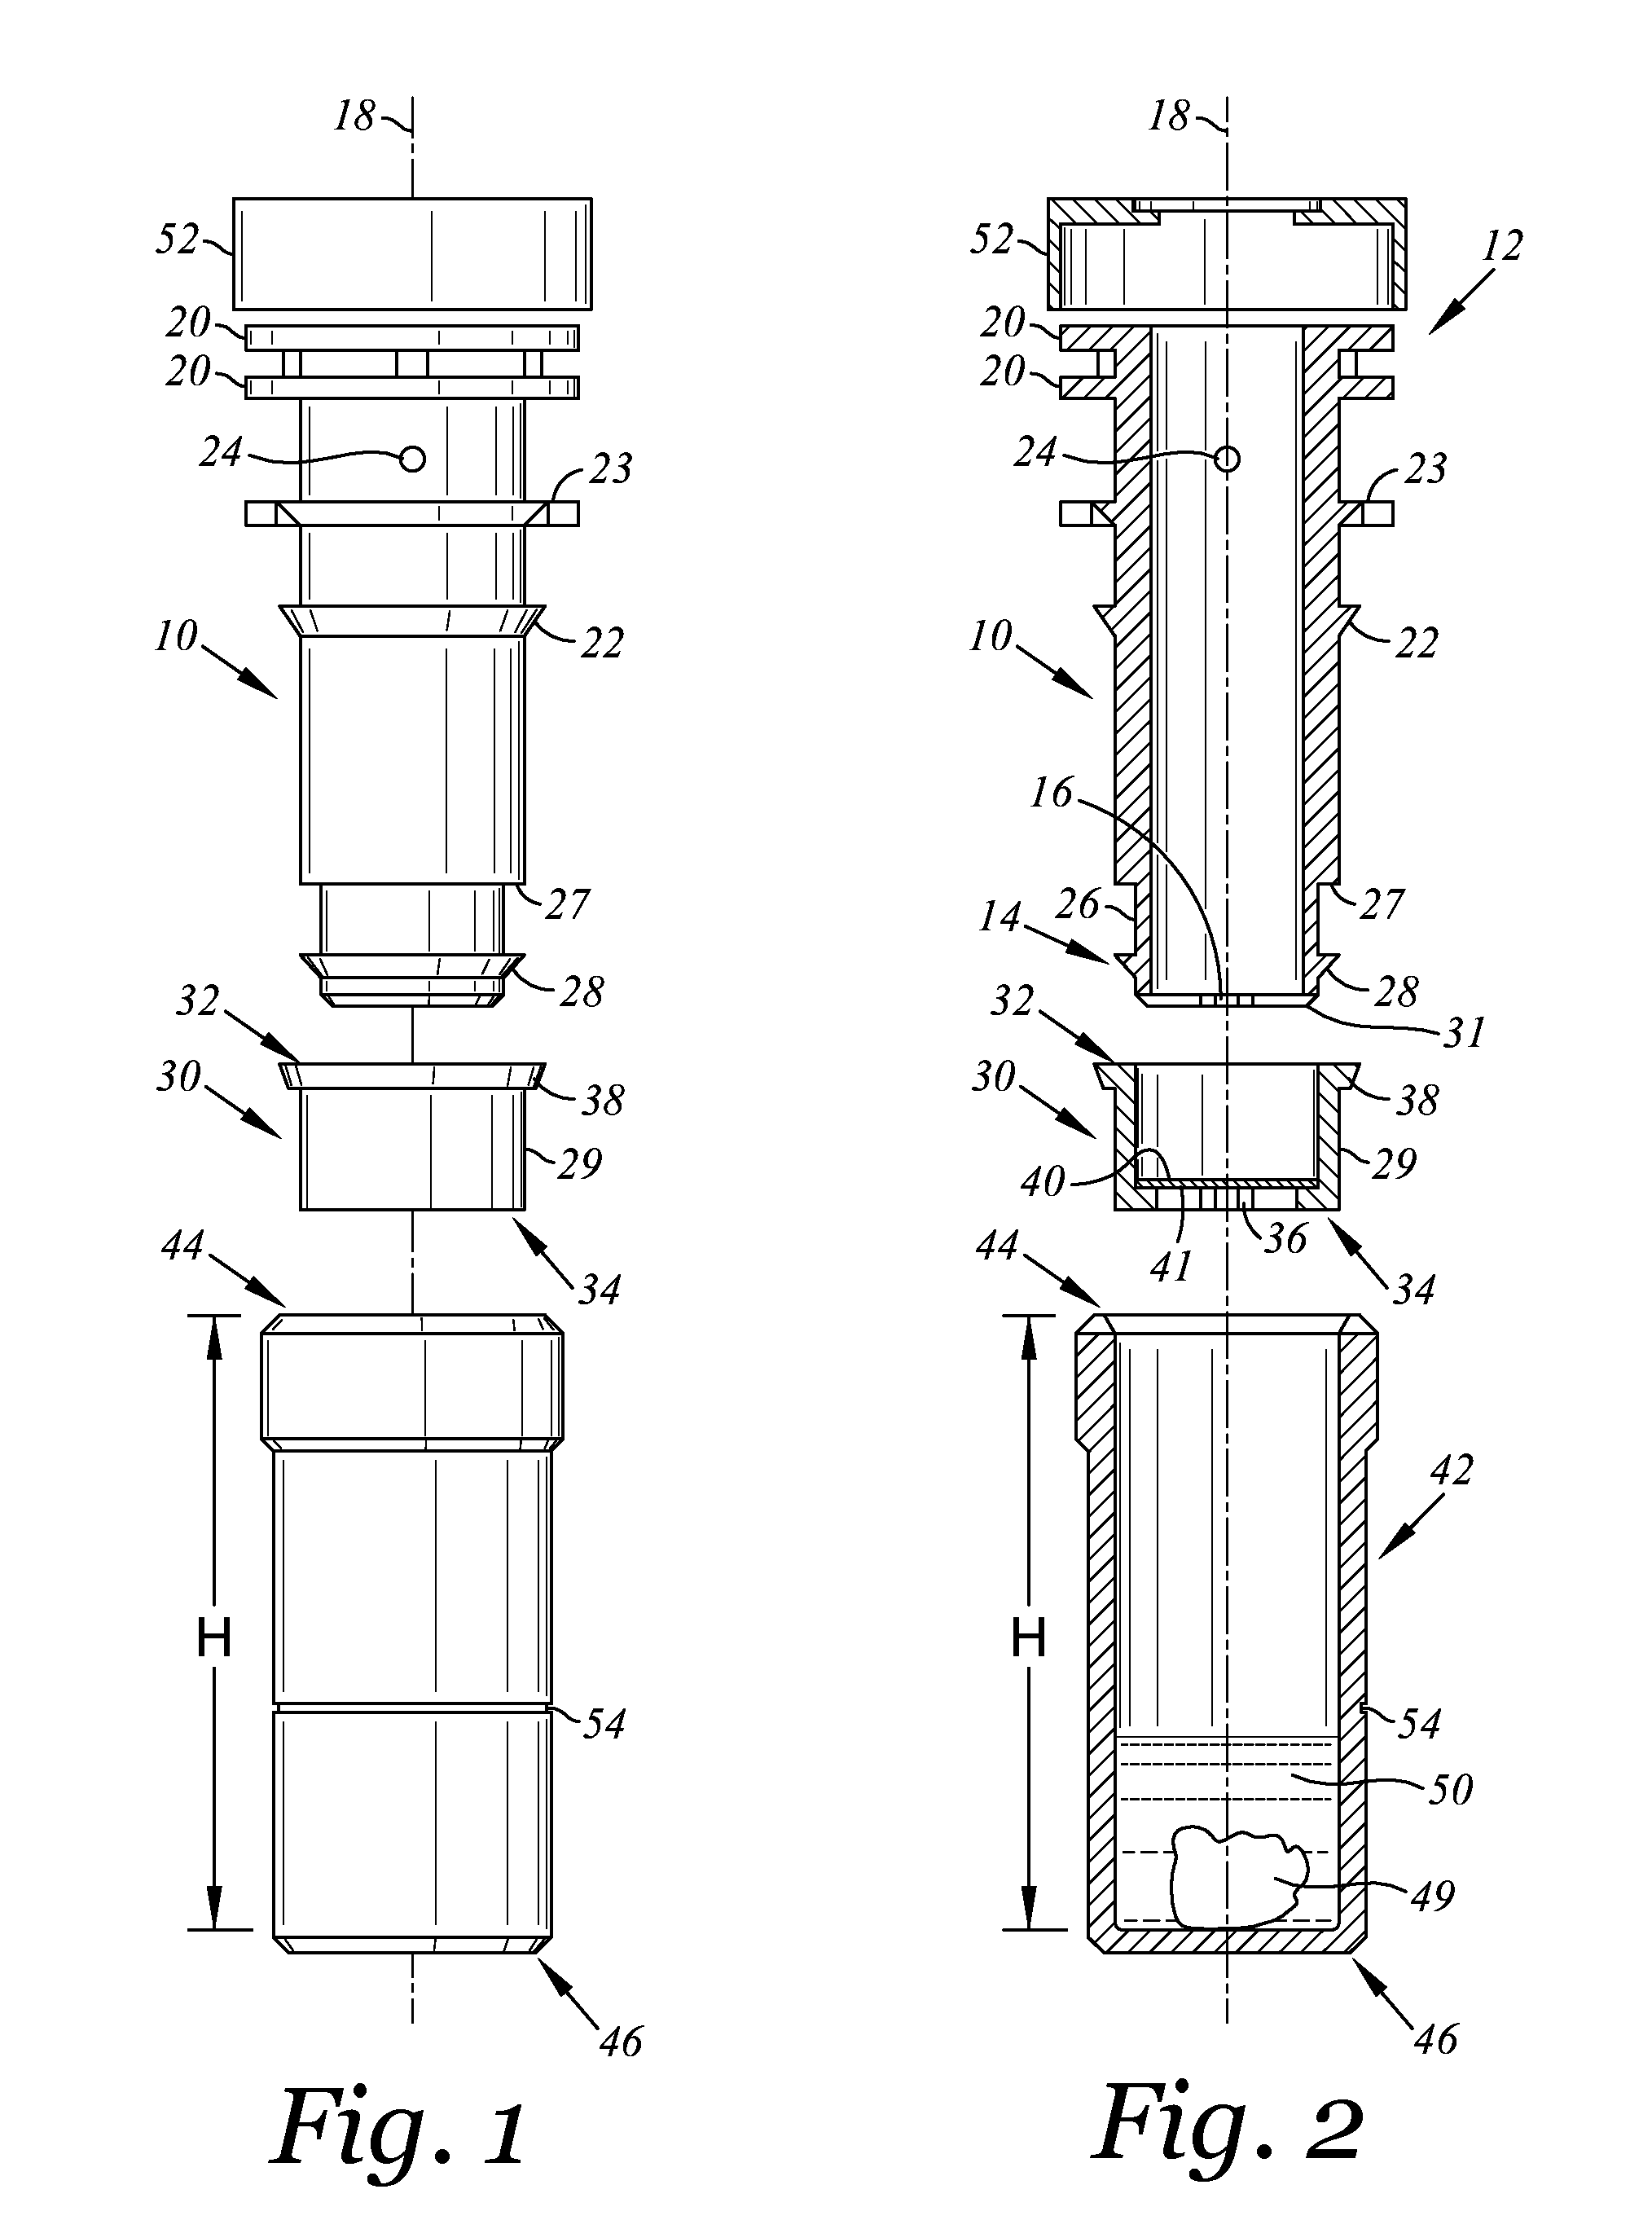 Filter vial with limited piston stroke